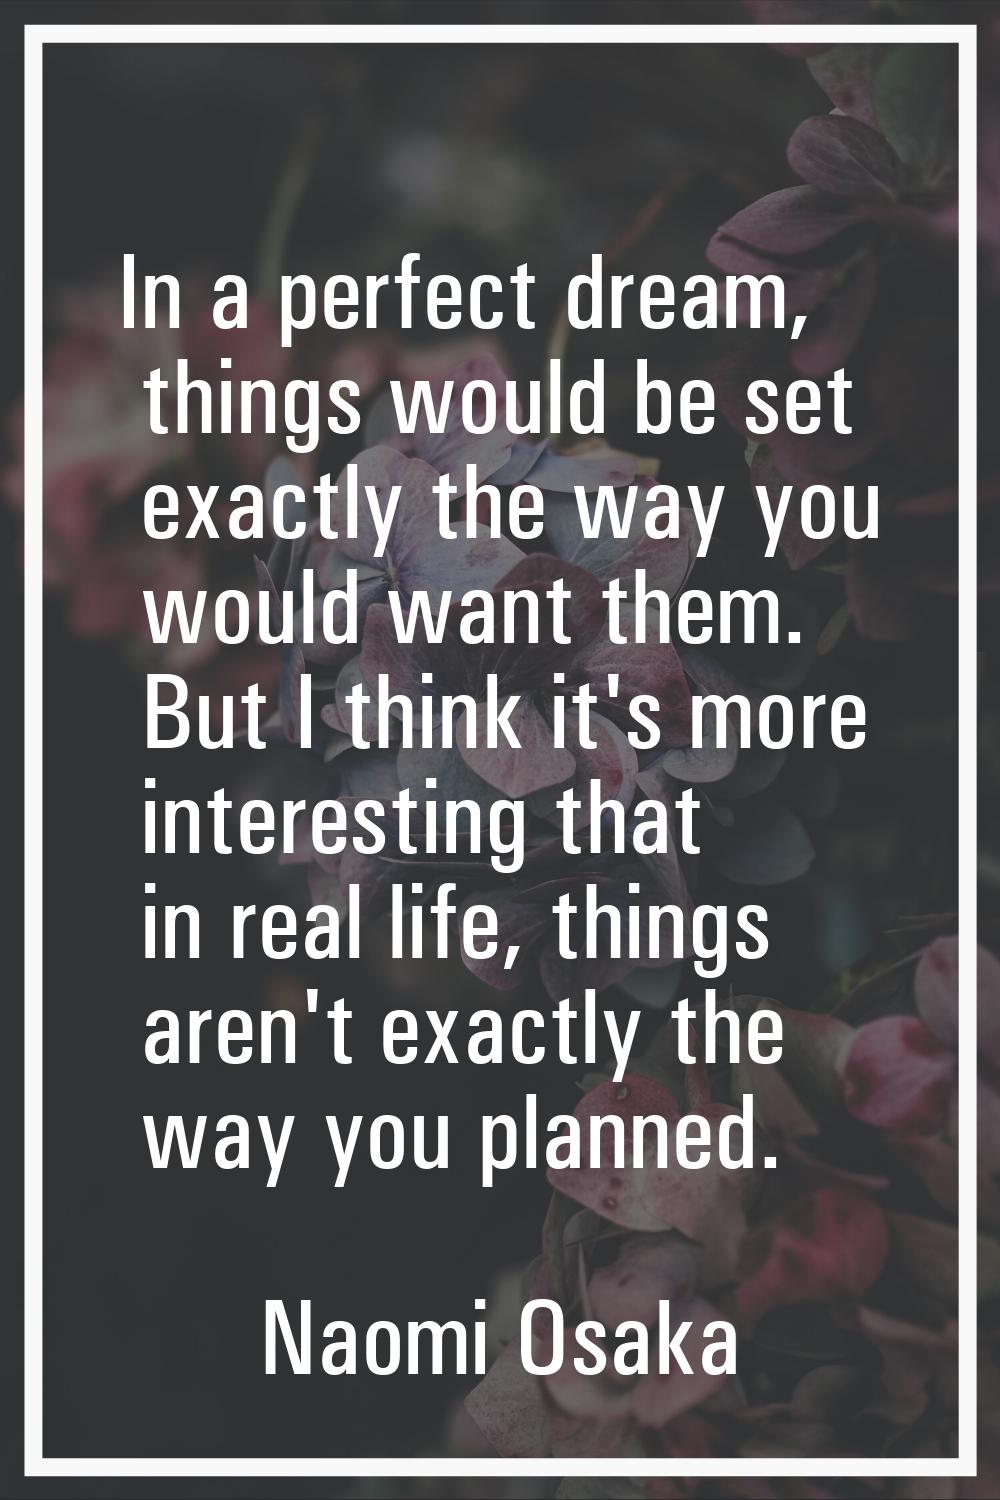 In a perfect dream, things would be set exactly the way you would want them. But I think it's more 